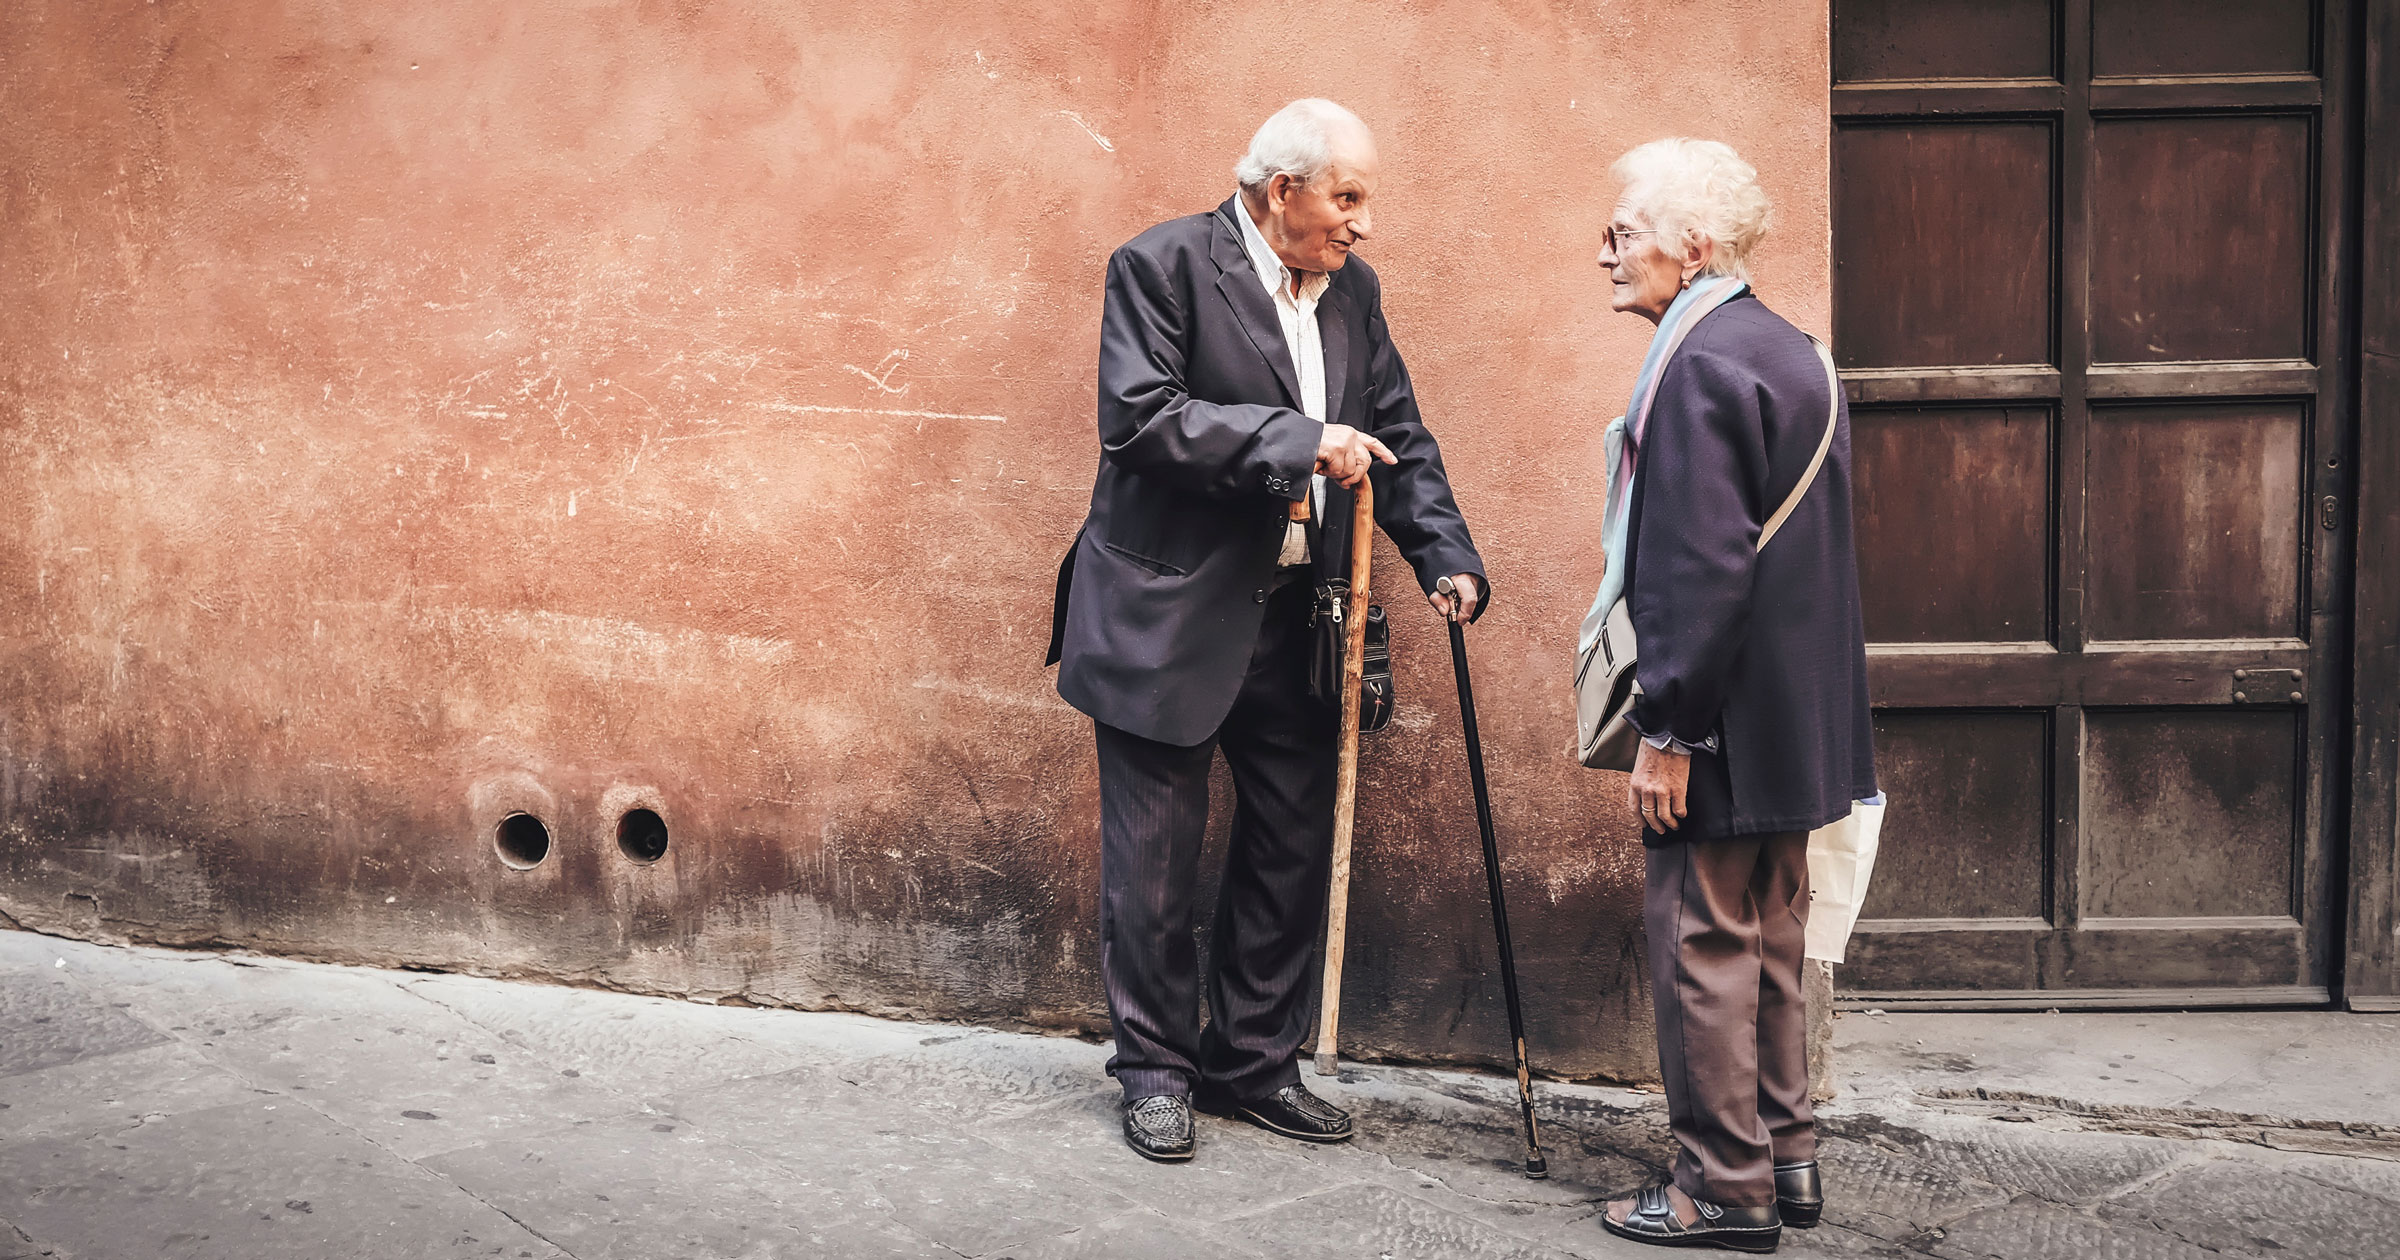 two-old-people-talking